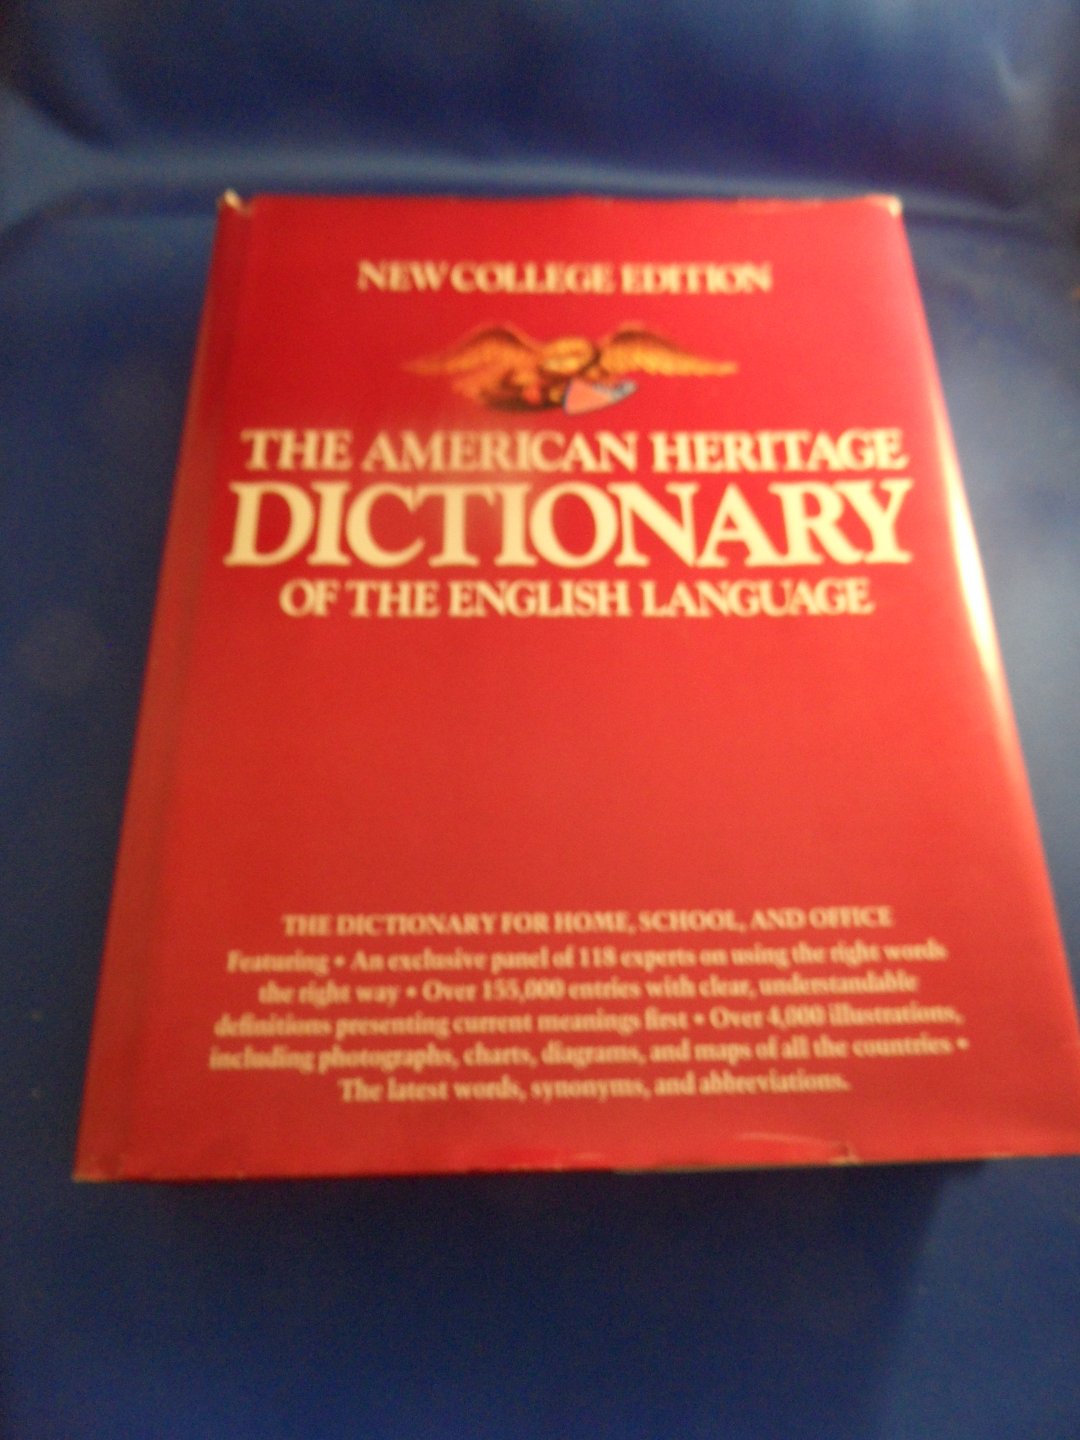 Morris, William (red.) - The American Heritage Dictionary of the English Language.